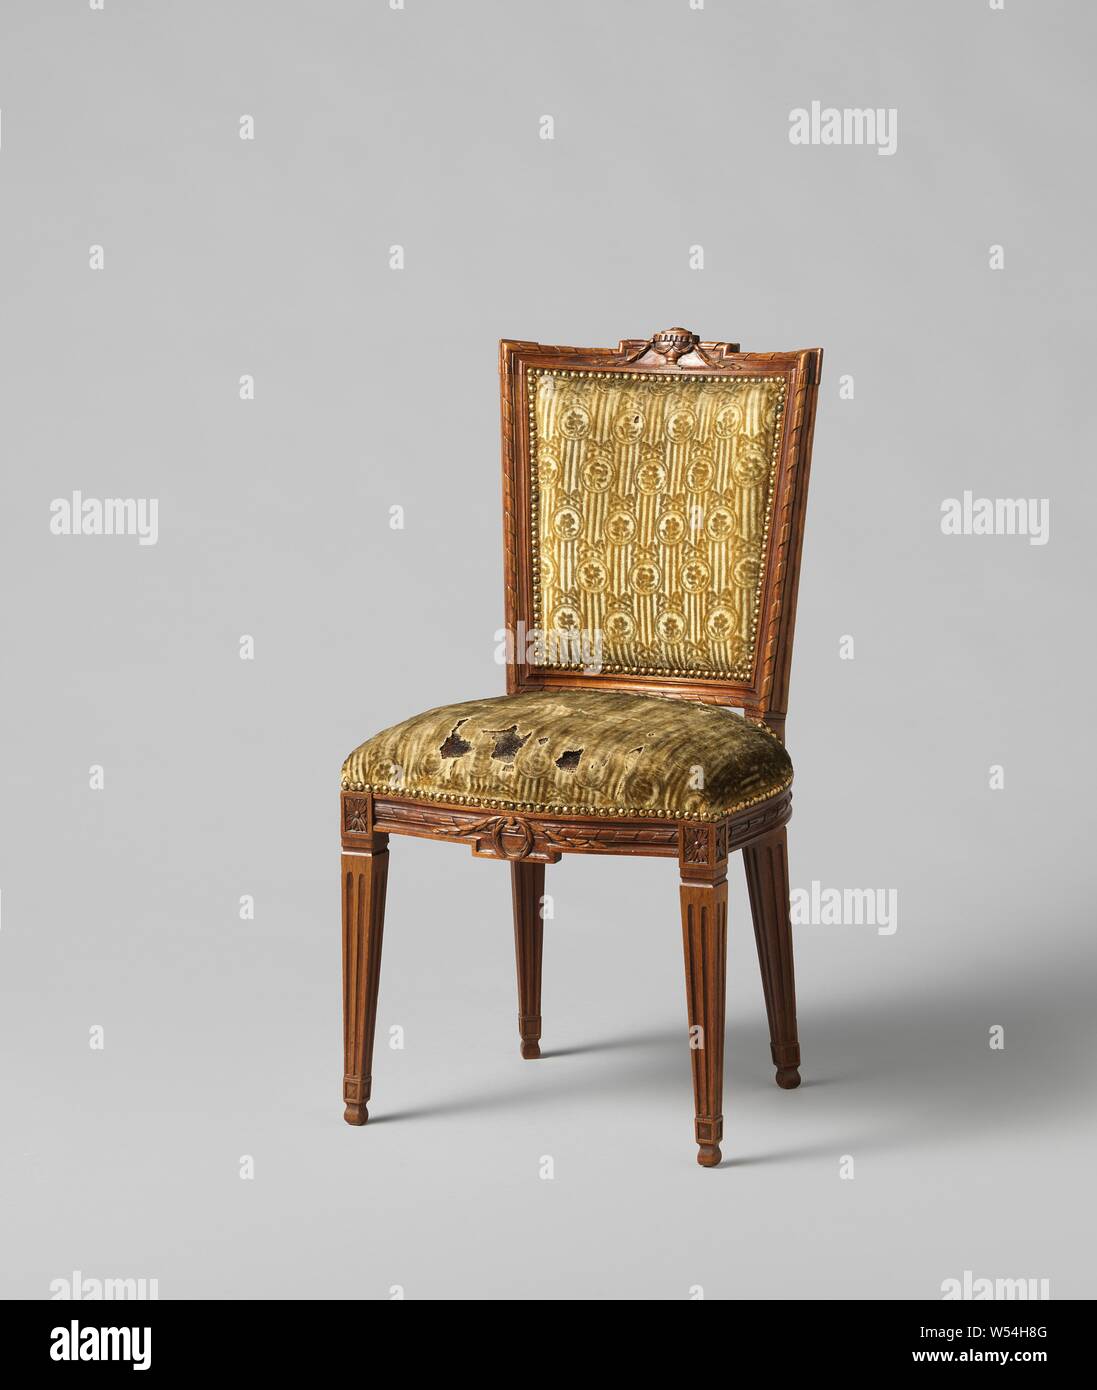 Chair of mahogany, covered with string with a continuous pattern of hanging ovals in which a flower on striped ground, covered with string with a continuous pattern of hanging oval with a flower on it a striped ground. The square legs are fluted. The front line is decorated in the middle with a laurel wreath and a pendulum. The back frame is parallelogram-shaped and concave. The upper threshold is decorated with a stabbed vase and laurel garland. The cover is attached with nails with gold-plated heads. The chair belongs to an ameublement, anonymous, Northern Netherlands, 1775 - 1800, wood Stock Photo